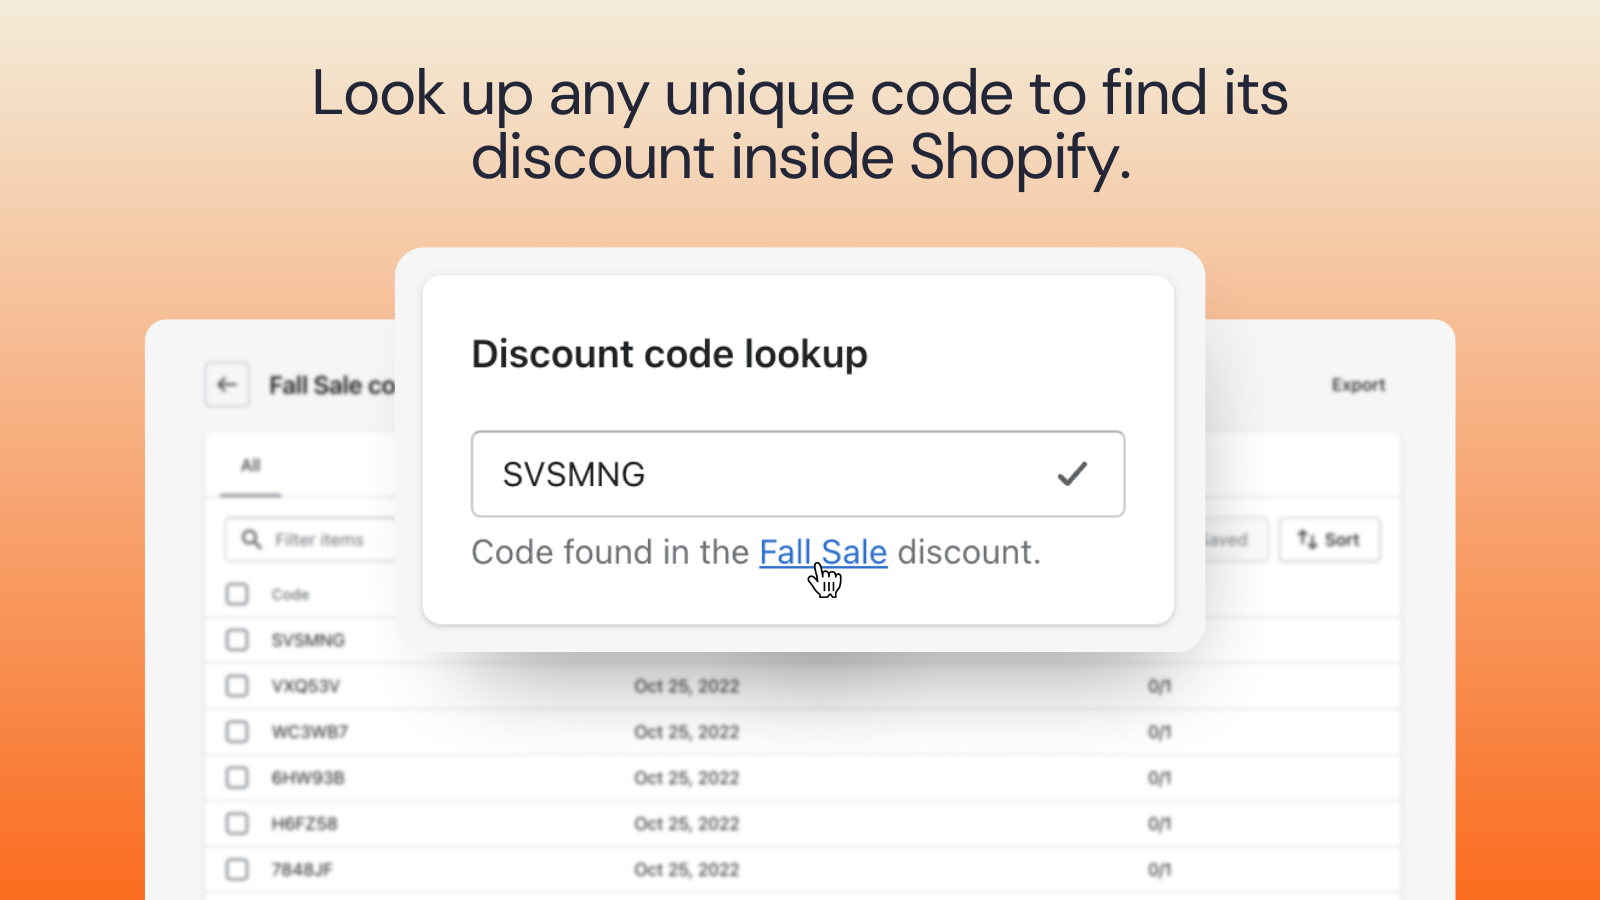 Look up any unique code to find its discount inside Shopify.